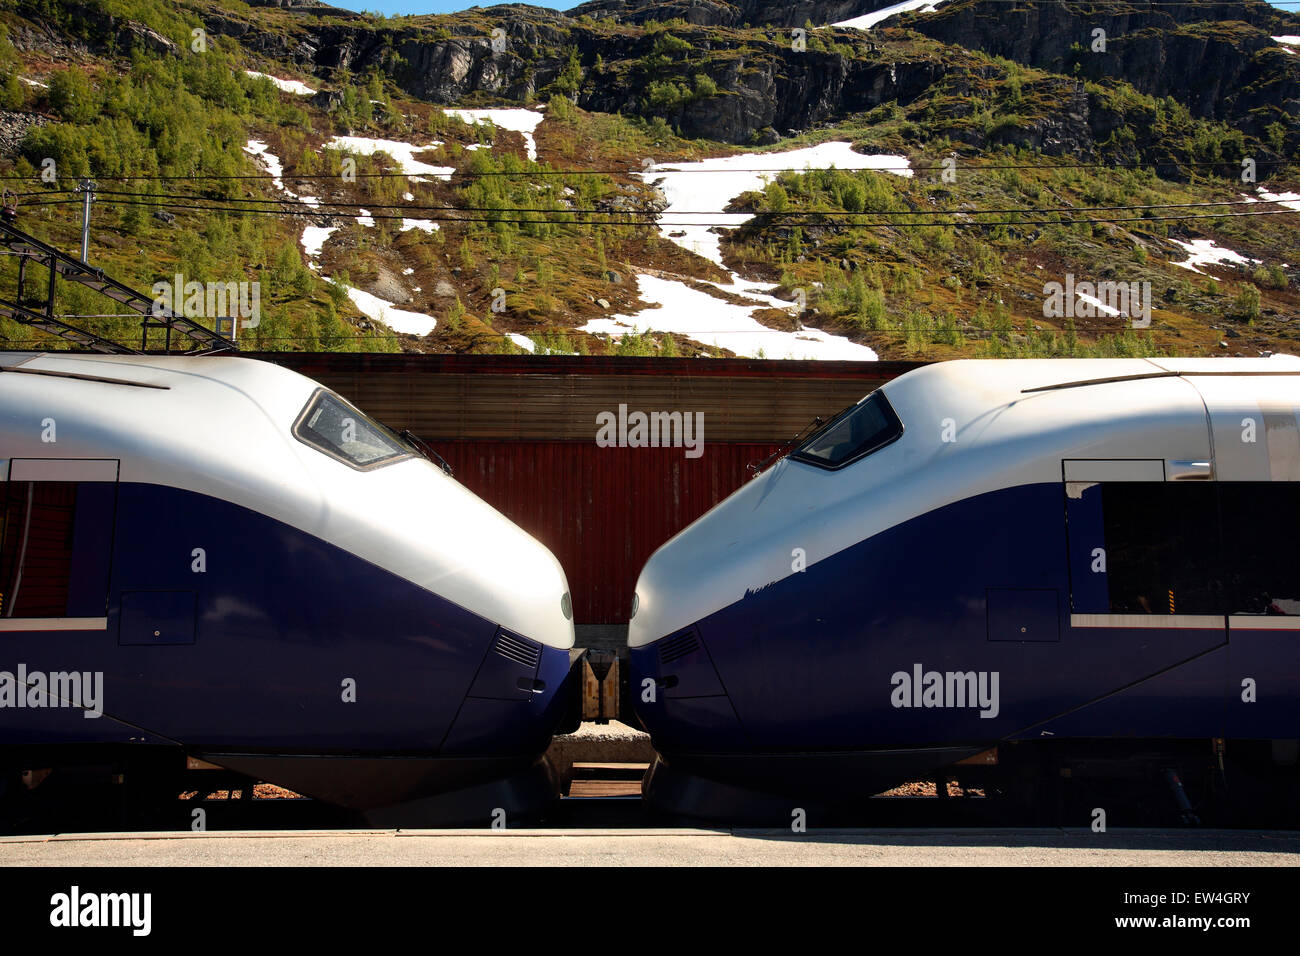 The front nose of two European trains in the mountains of Norway between Oslo and Bergen. Stock Photo